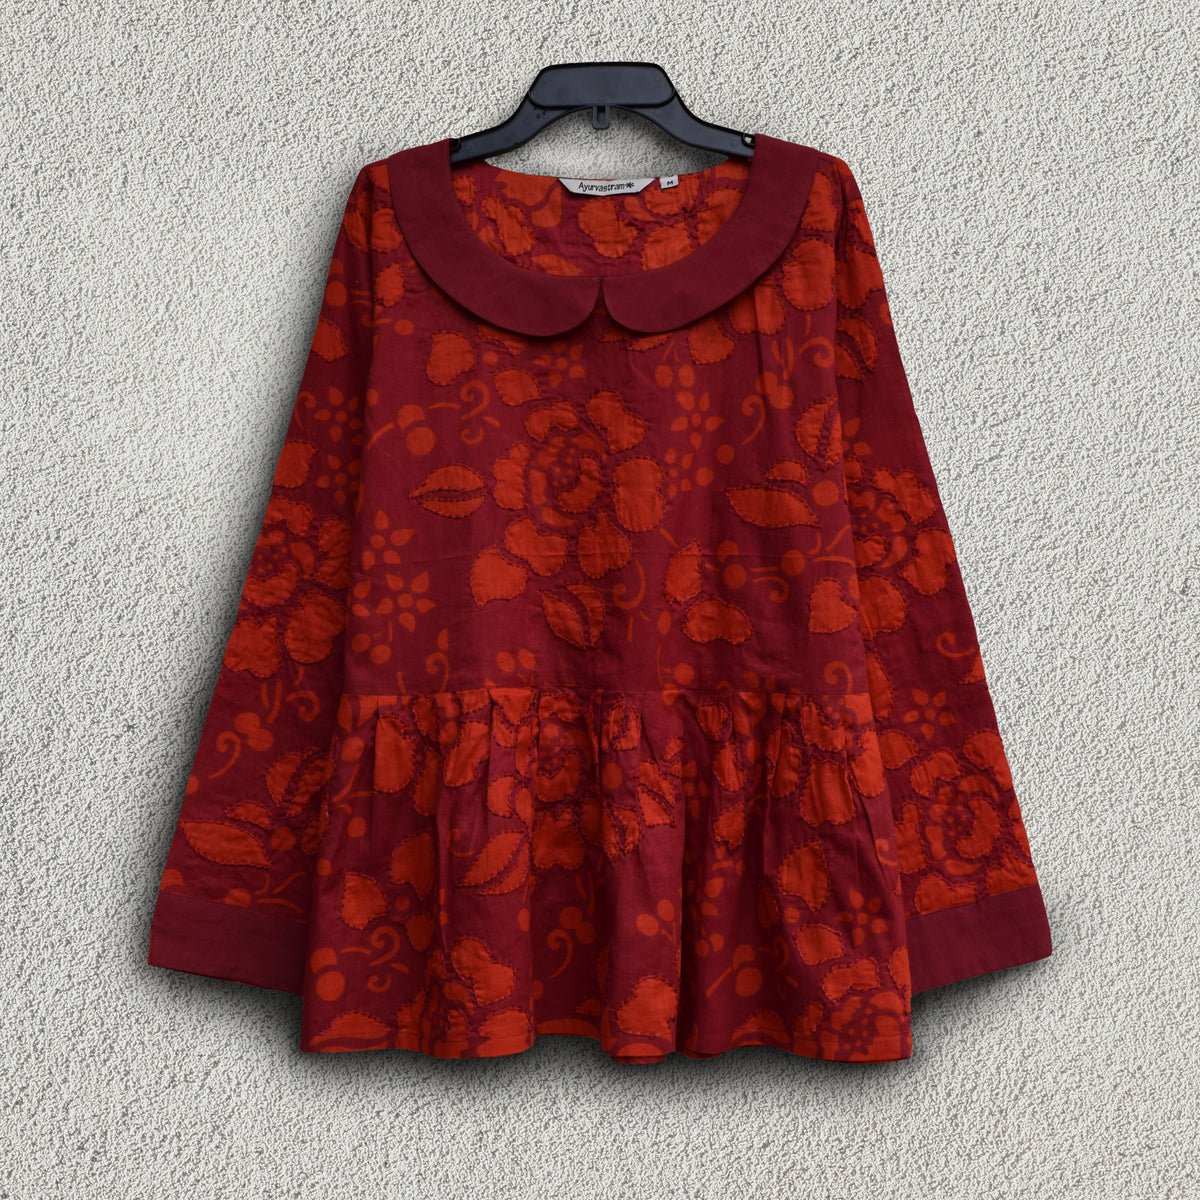 AVNI Printed Soft Cotton Hand Embroidered Peplum Top: Made to Order/Customizable